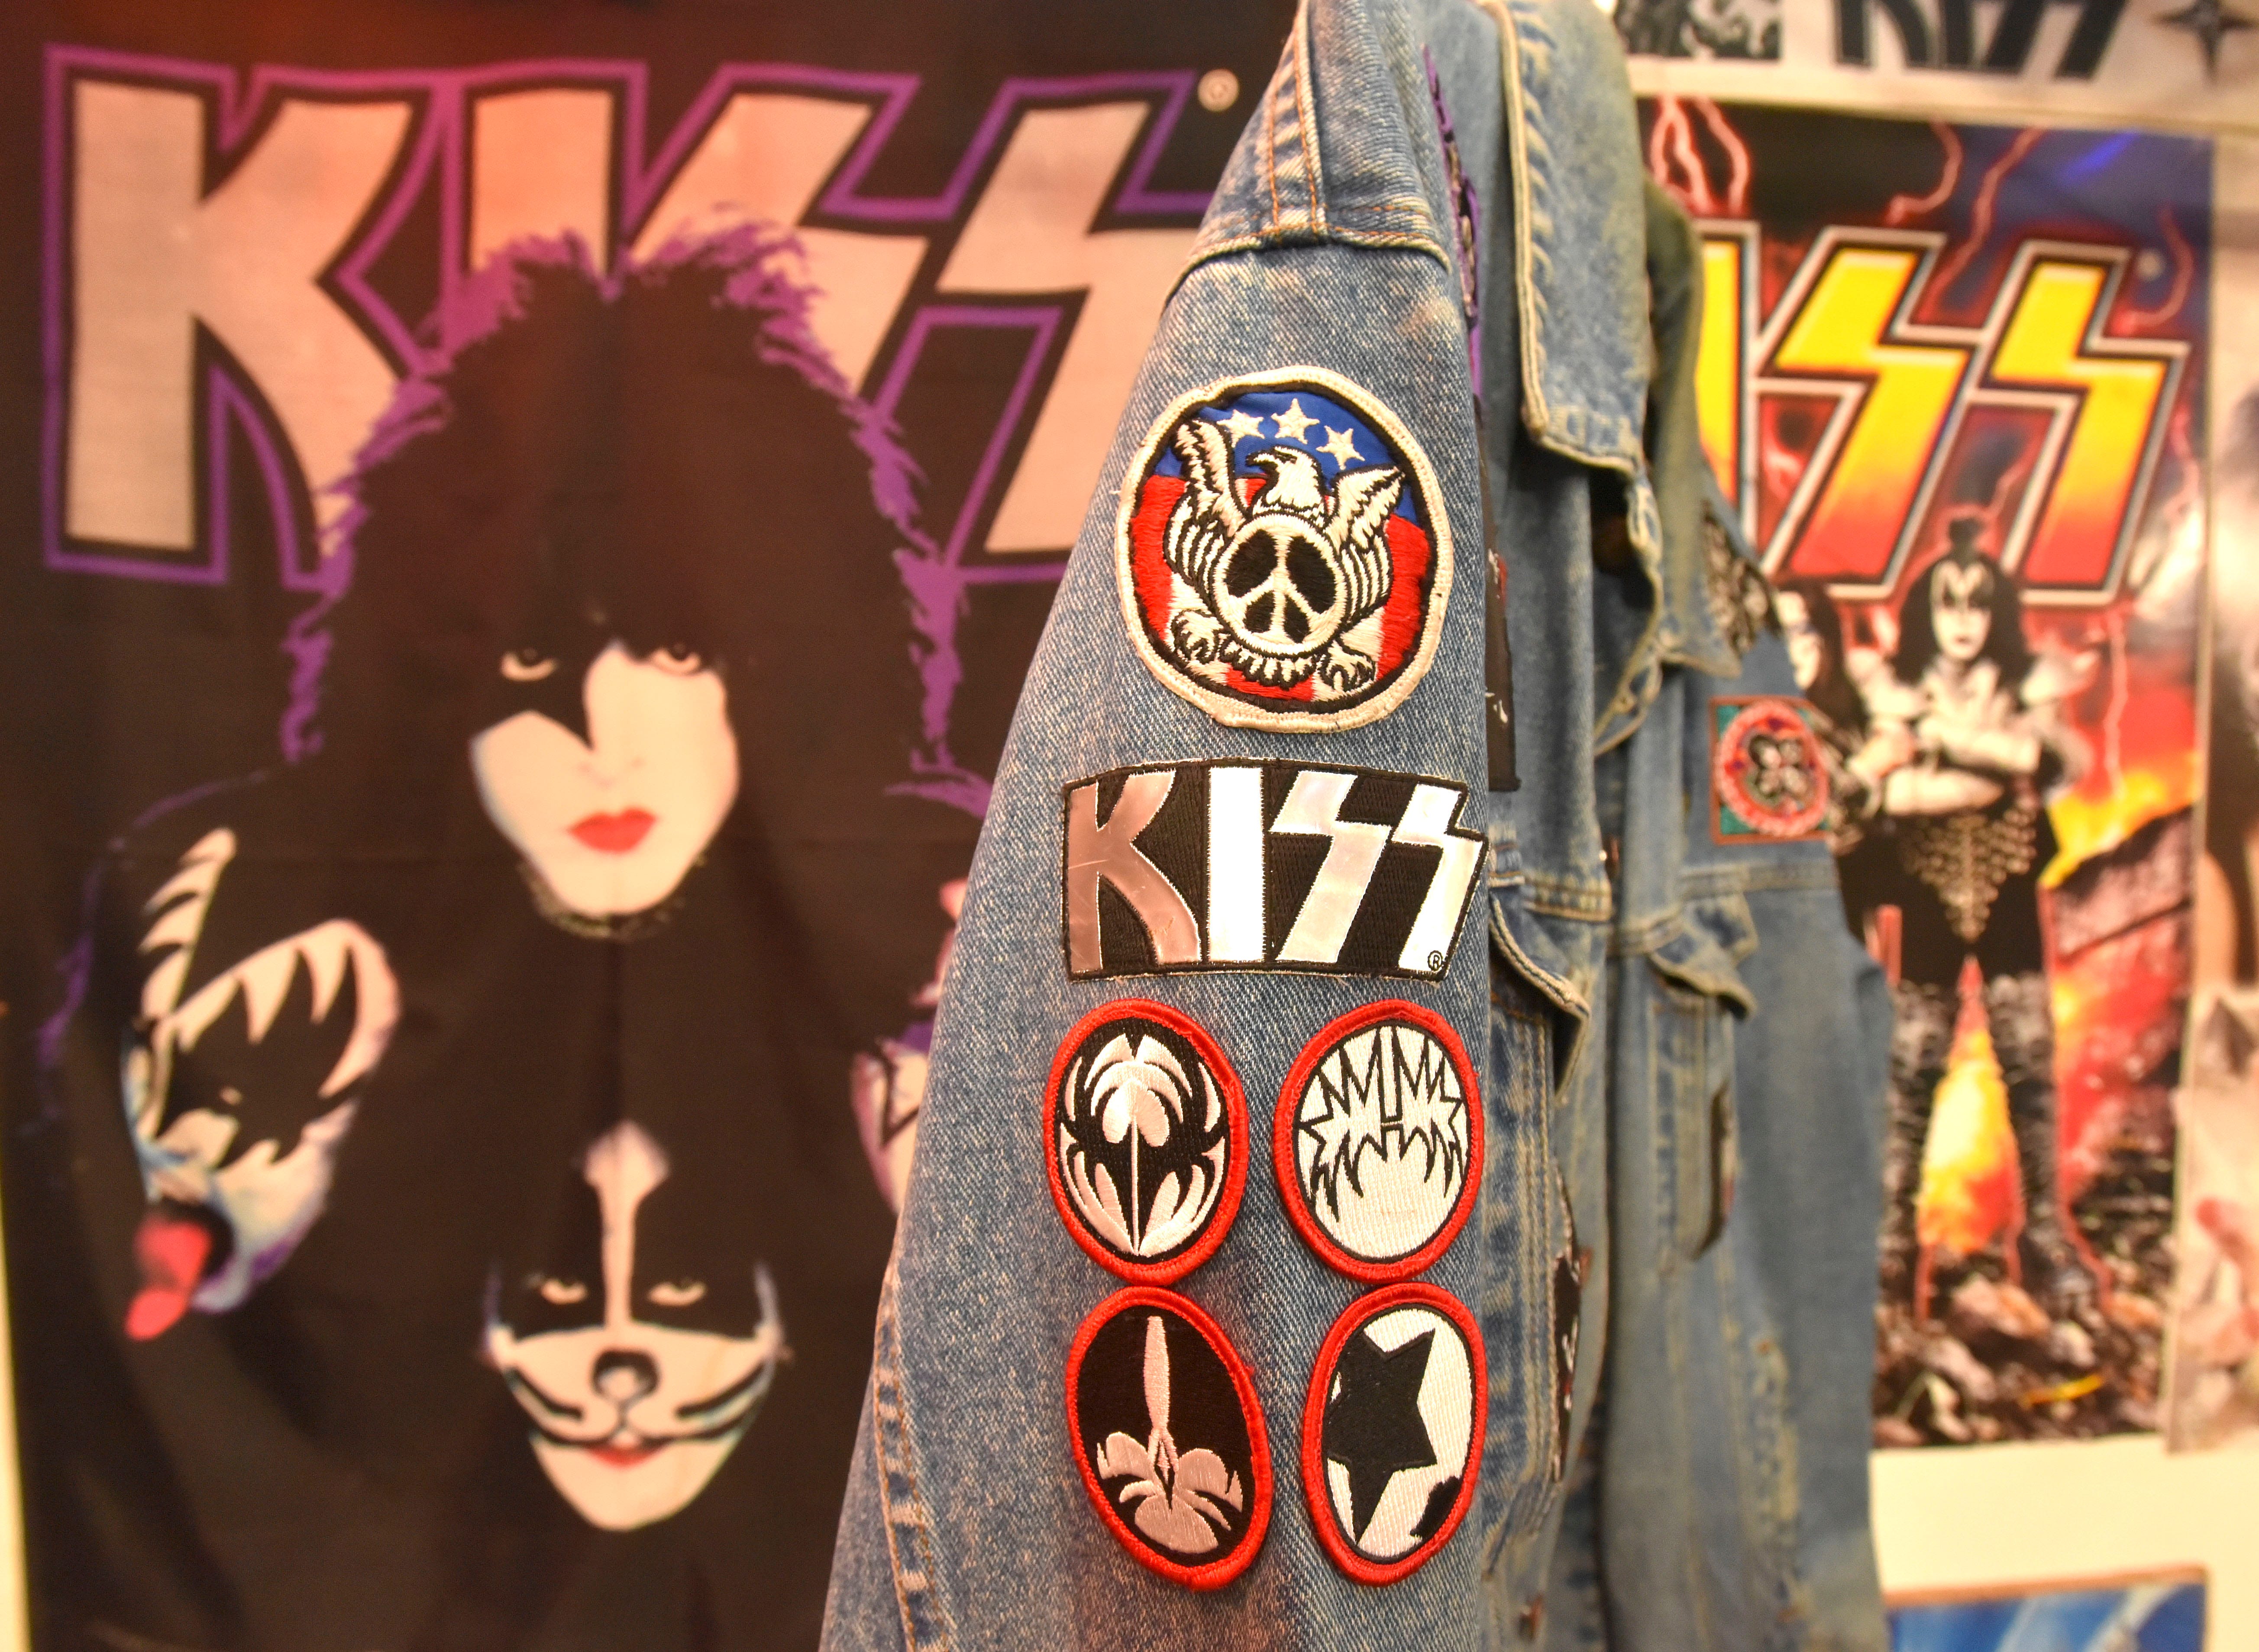 This is Pakulski's KISS jacket with 39 patches.